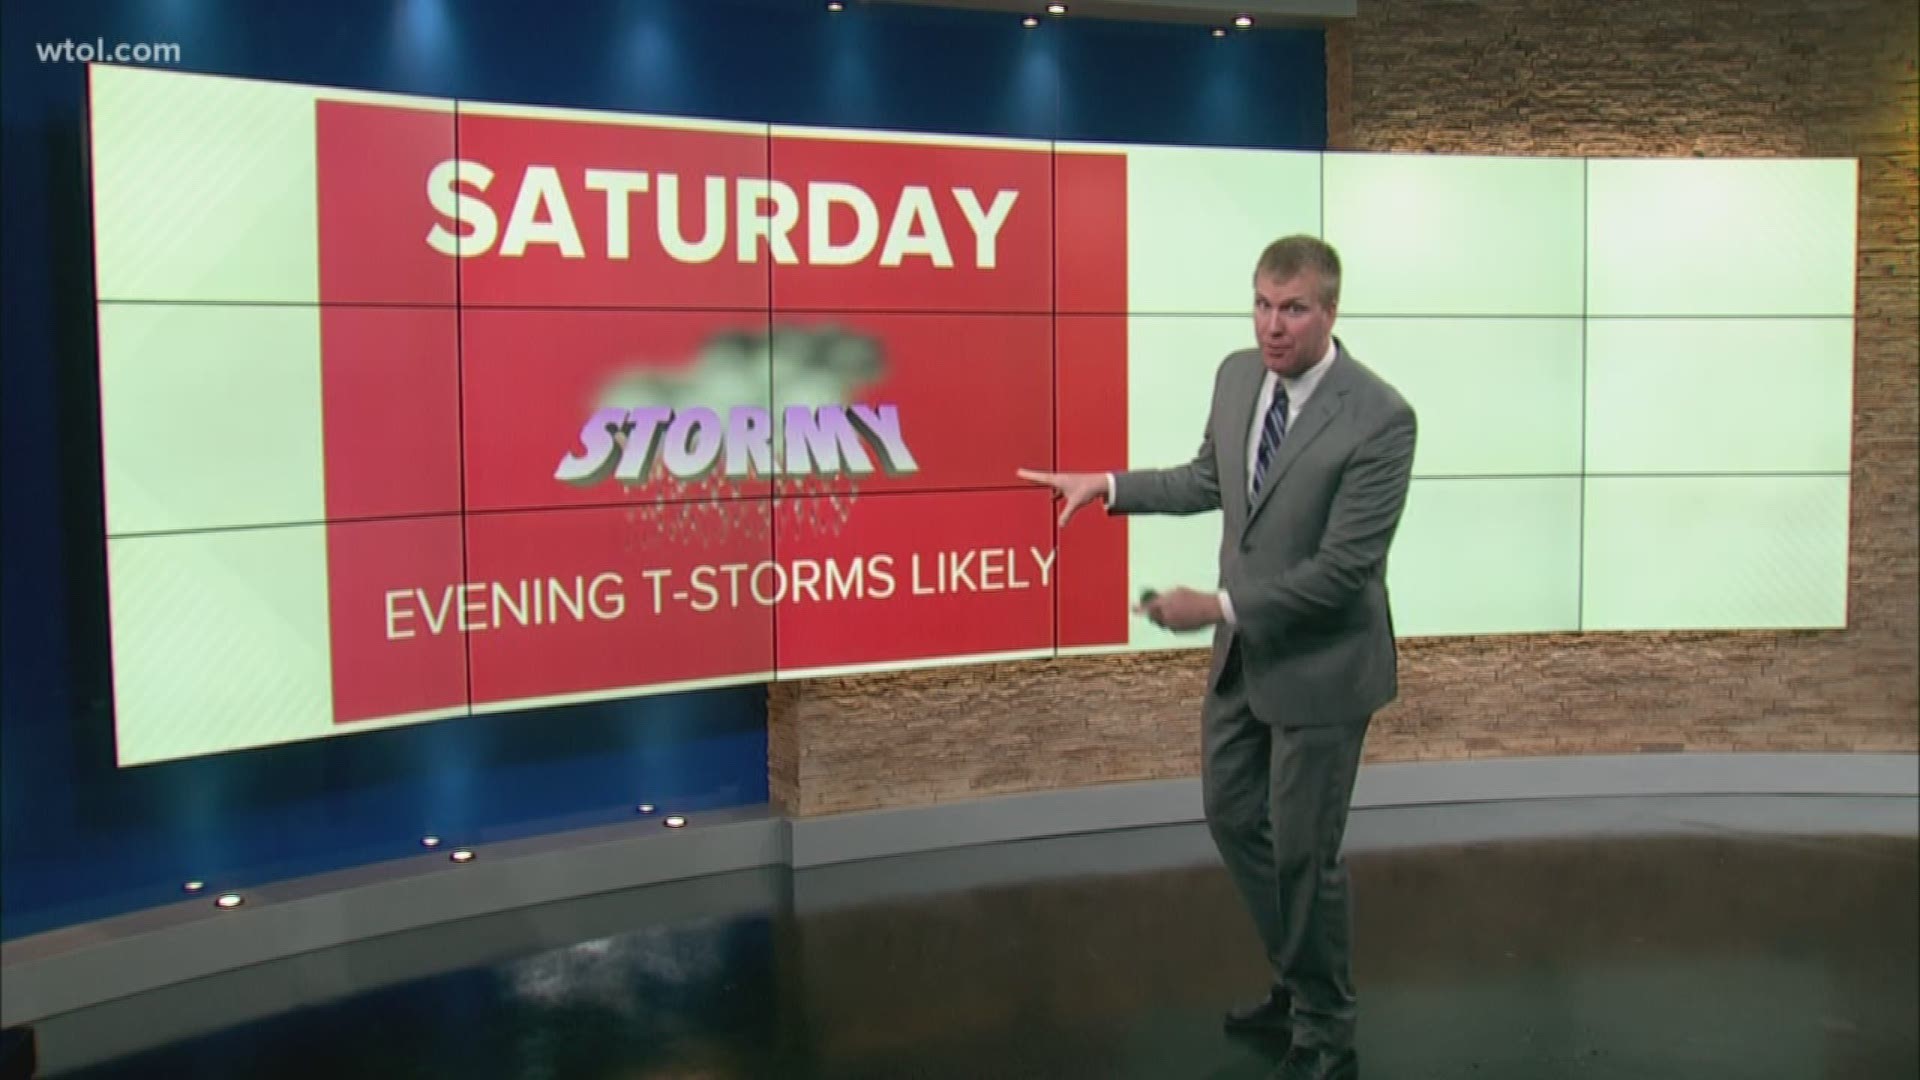 Stronger storms and downpours are likely for Saturday evening and watch for heavy rainfall overnight into Sunday